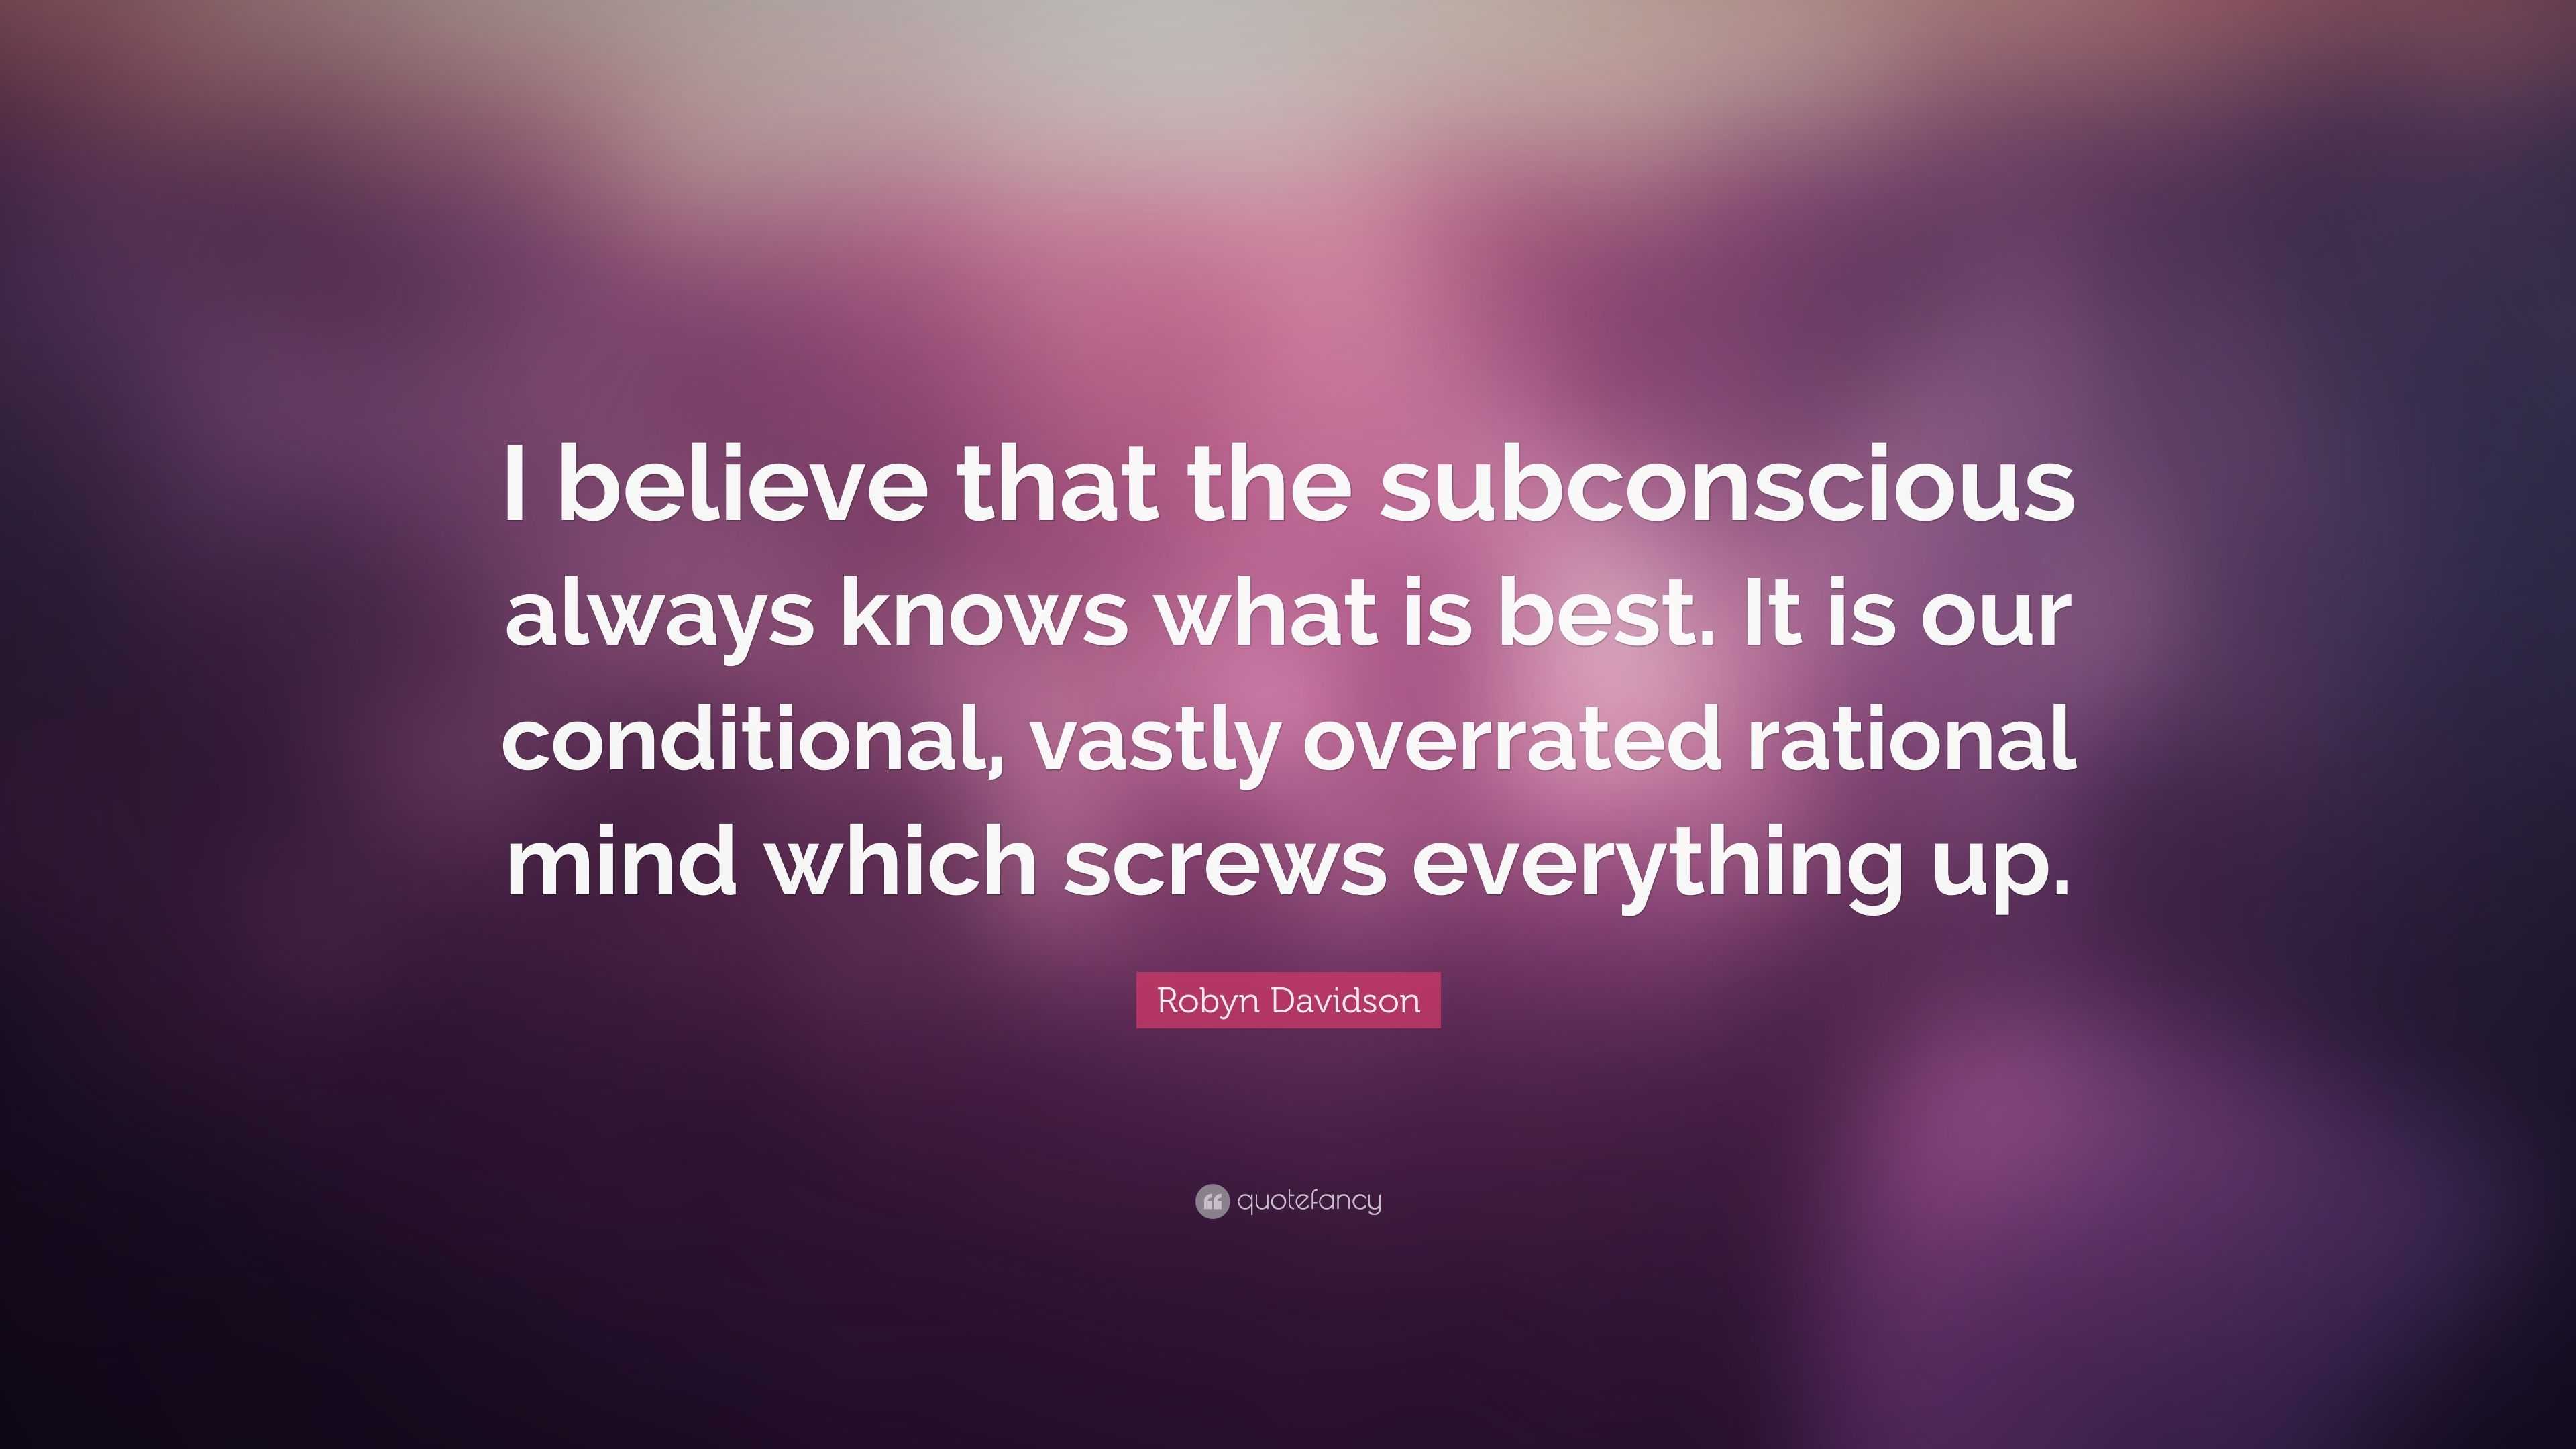 Robyn Davidson Quote: “I believe that the subconscious always knows ...